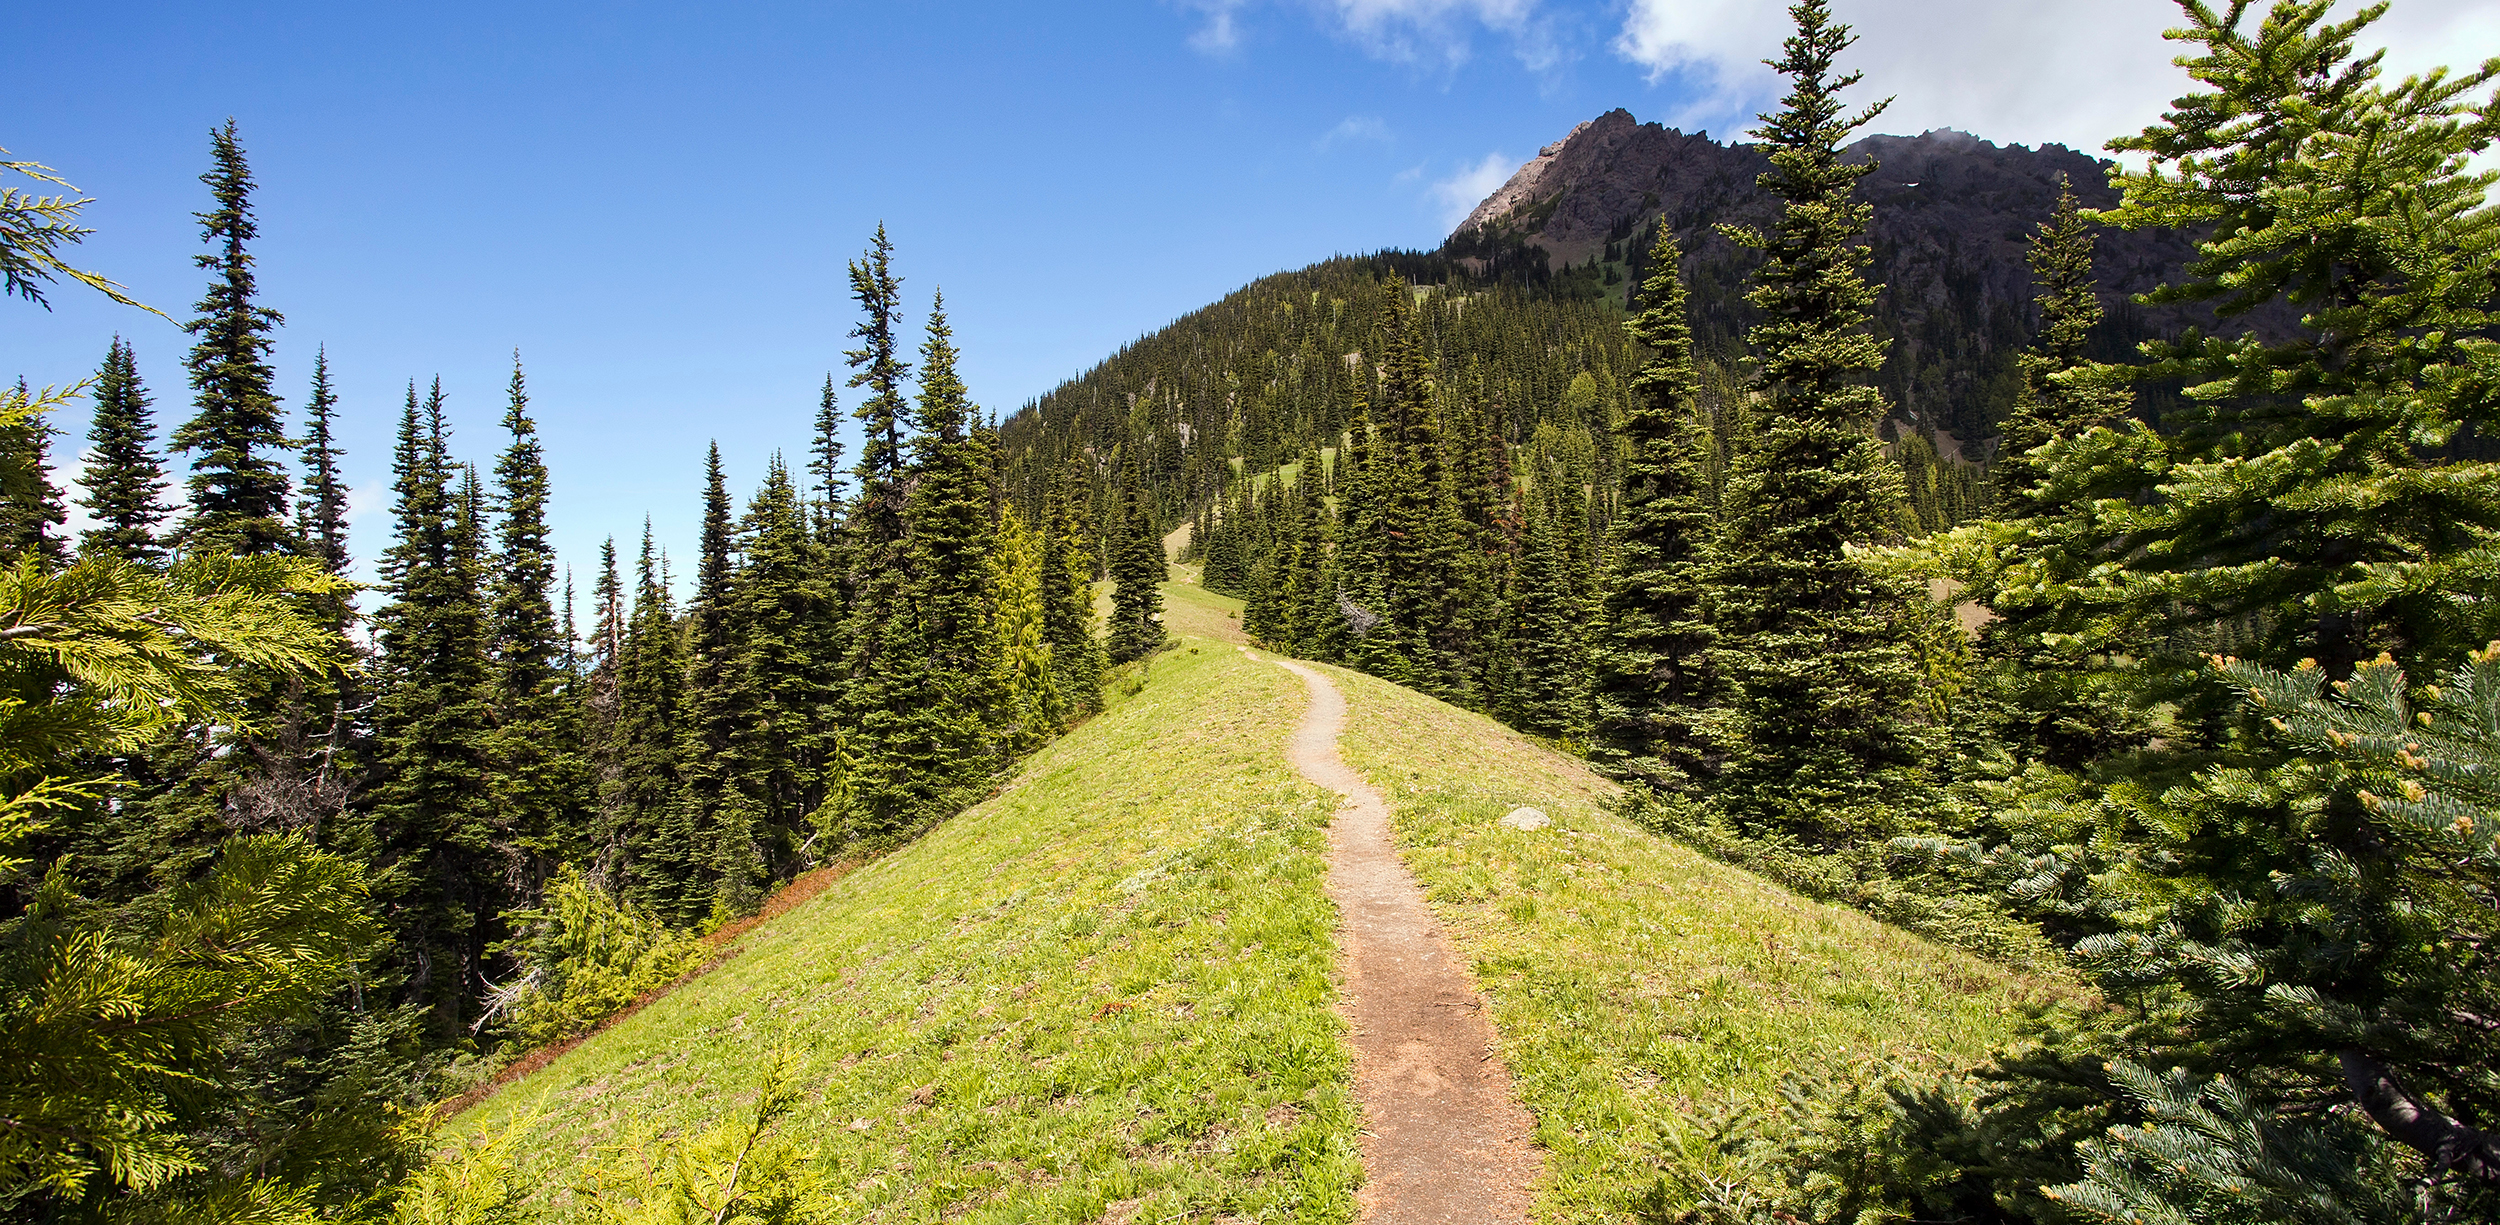 A narrow hiking path heads  through a pine forest, up a steep mountain ridge. Taken at Olympic National Park in Washington.